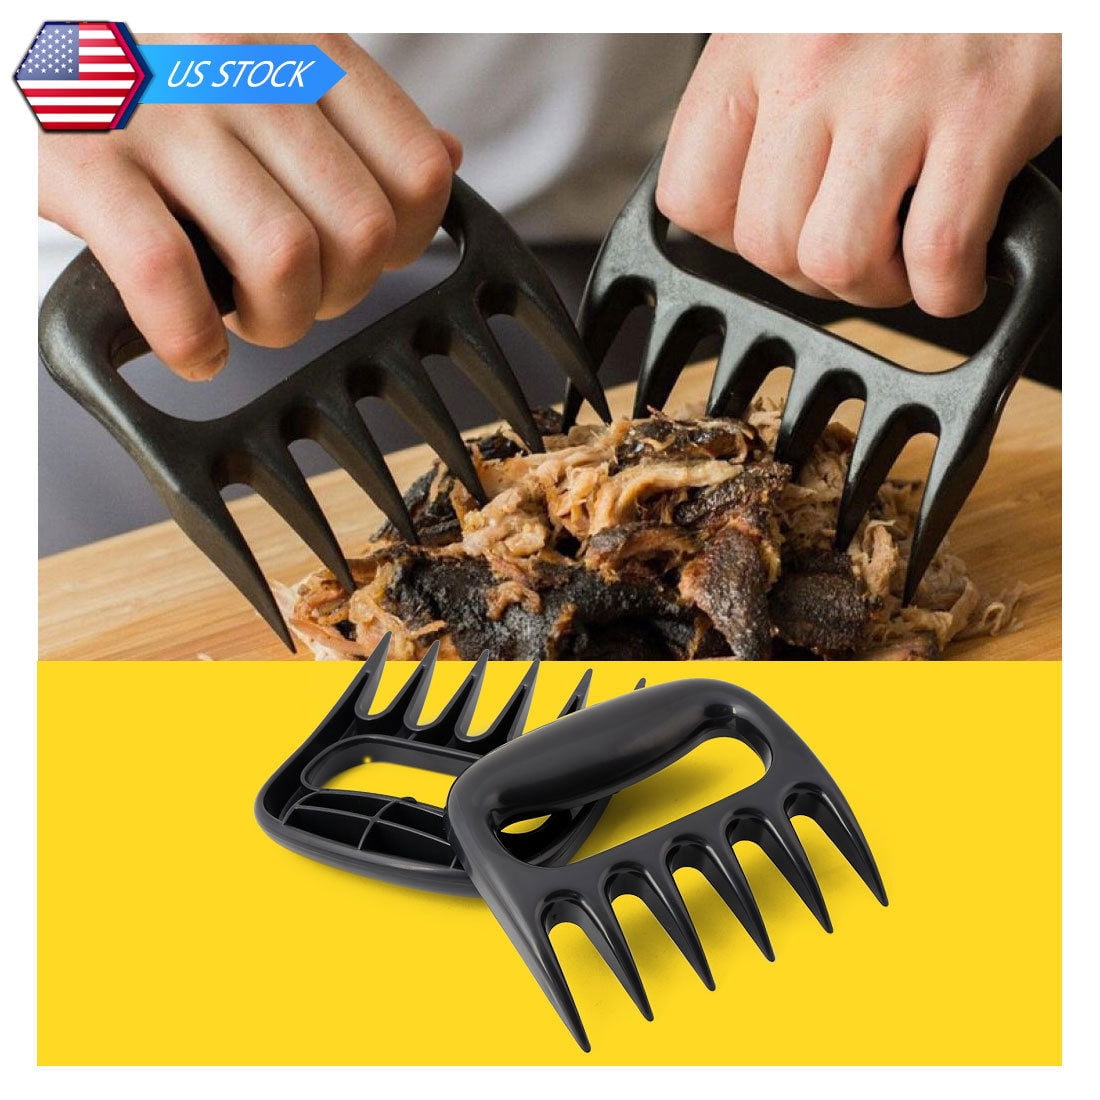 Bear Paws Grizzly Claws Meat Handler Fork Tongs Pull Shred Pork Lift Toss BBQ 